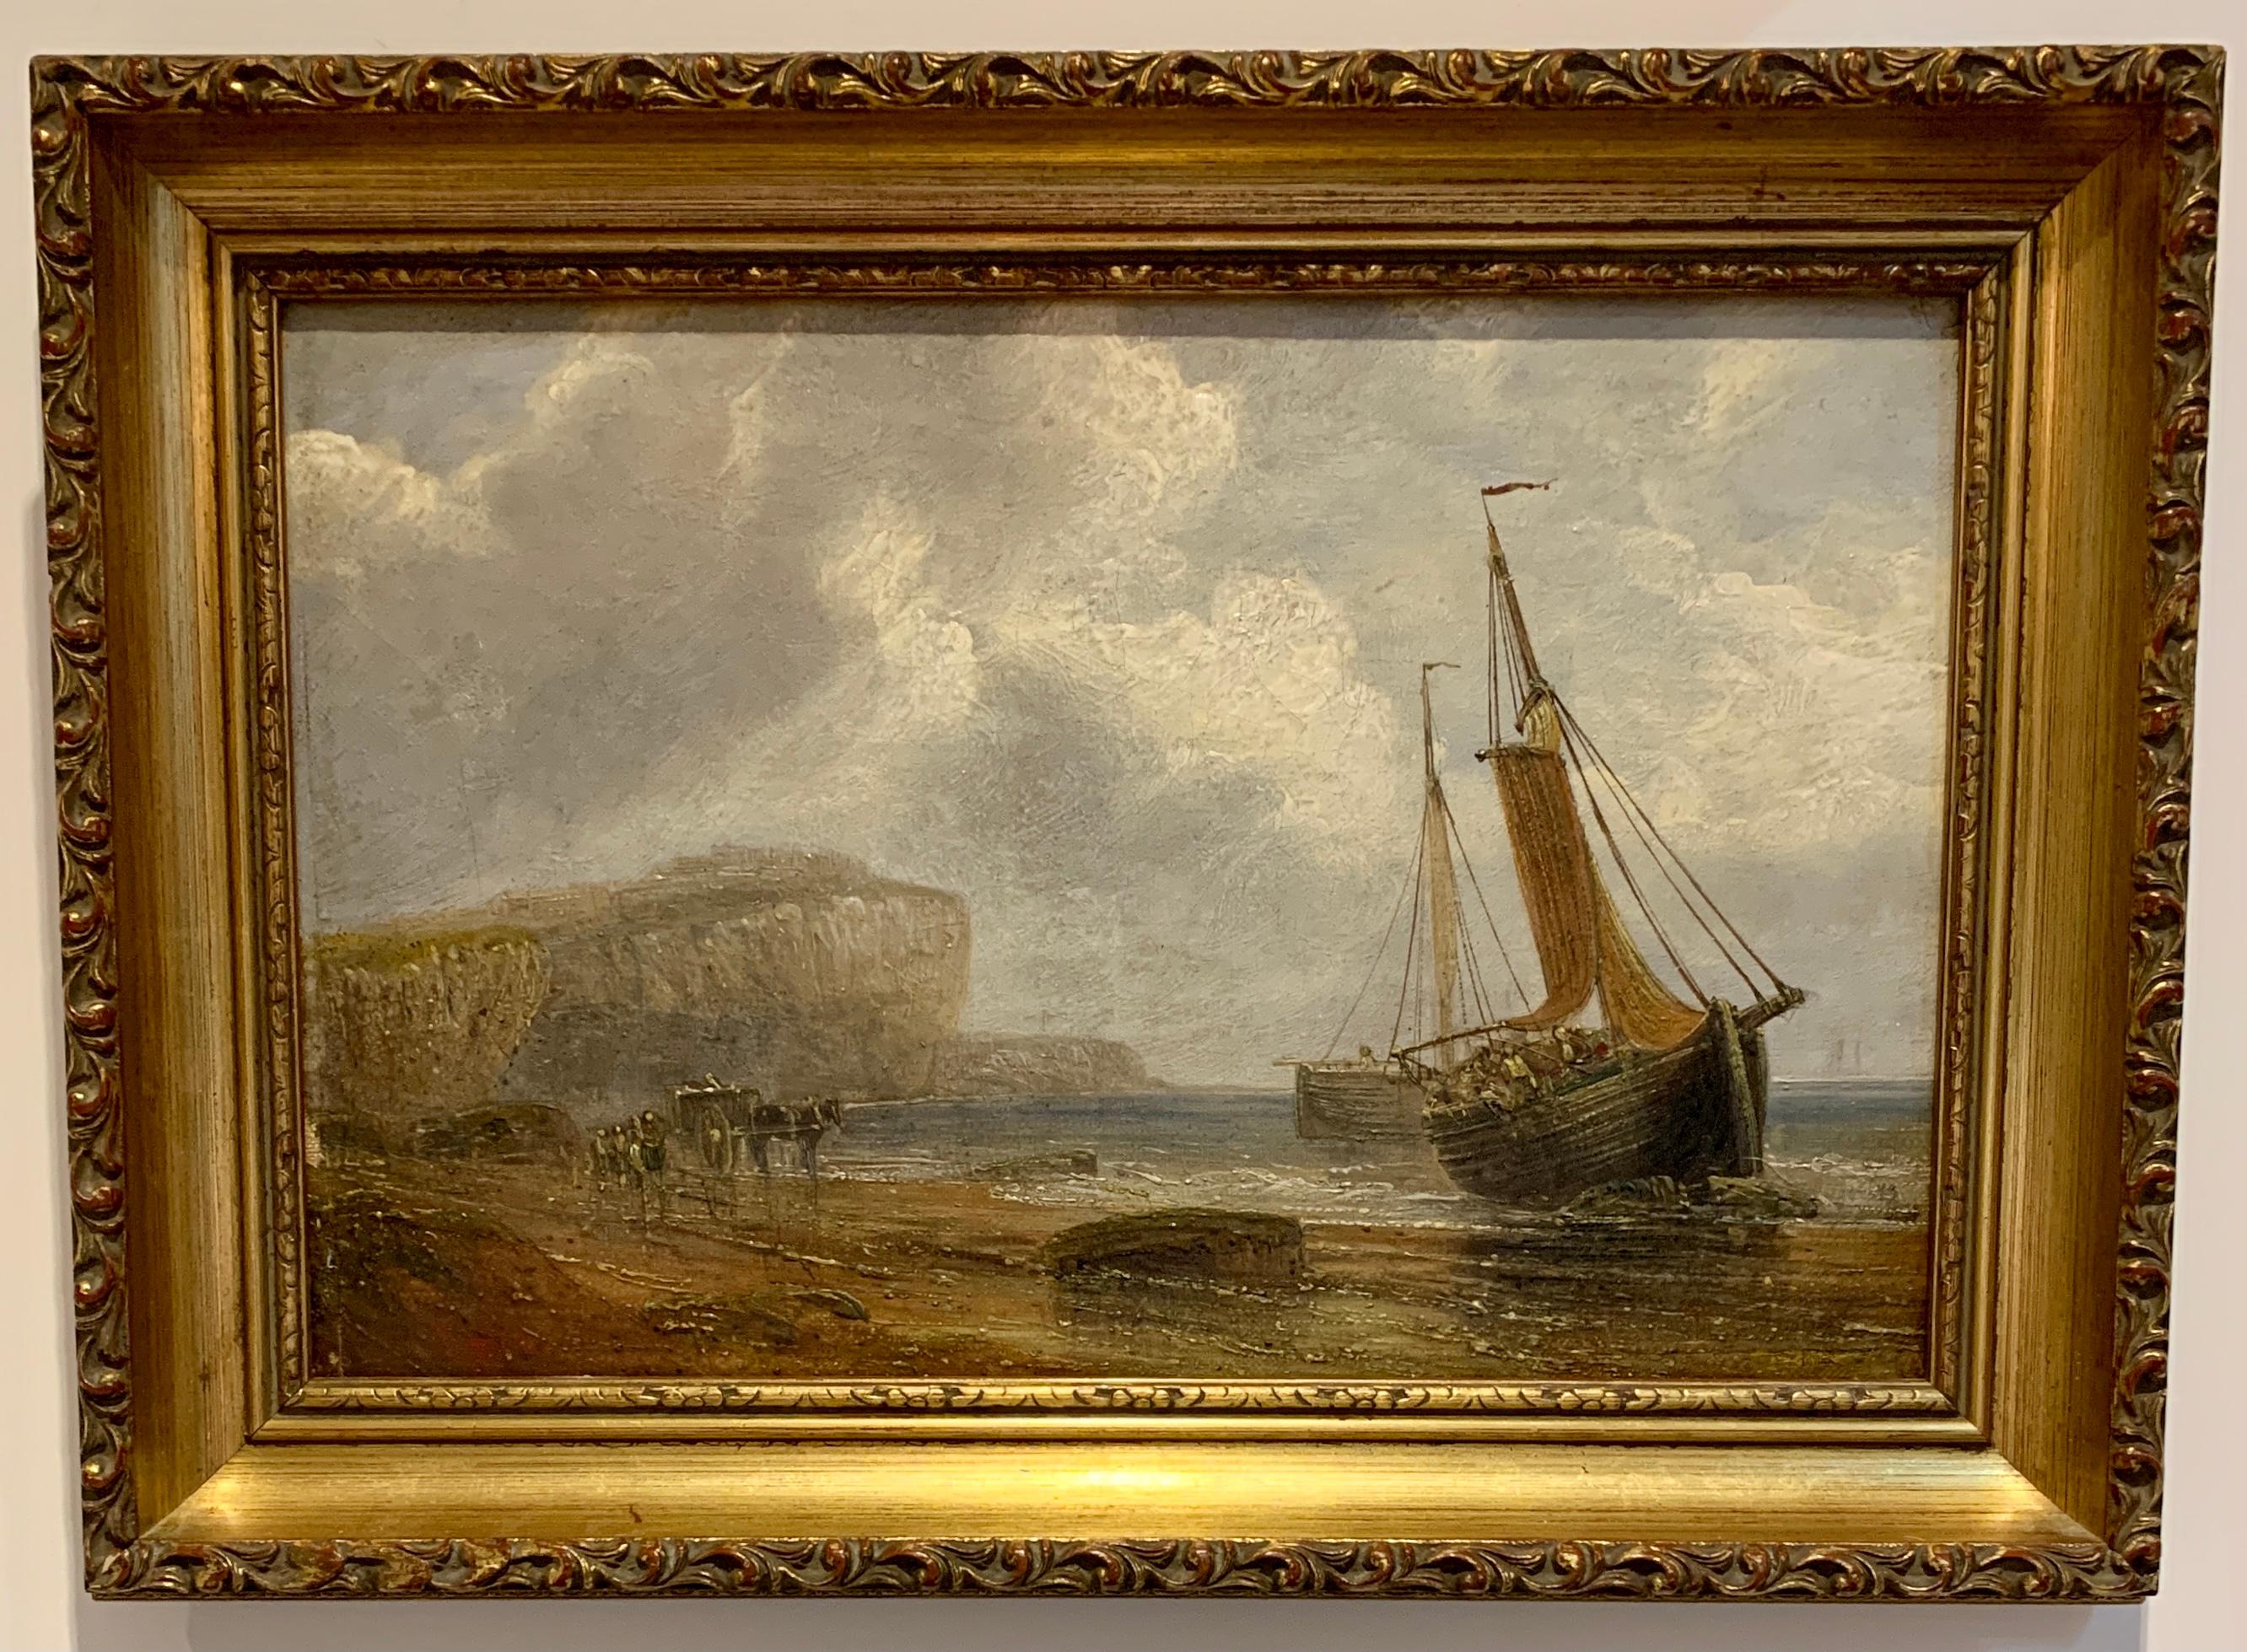 English 19th century Antique beach landscape with fishing boat on the shore